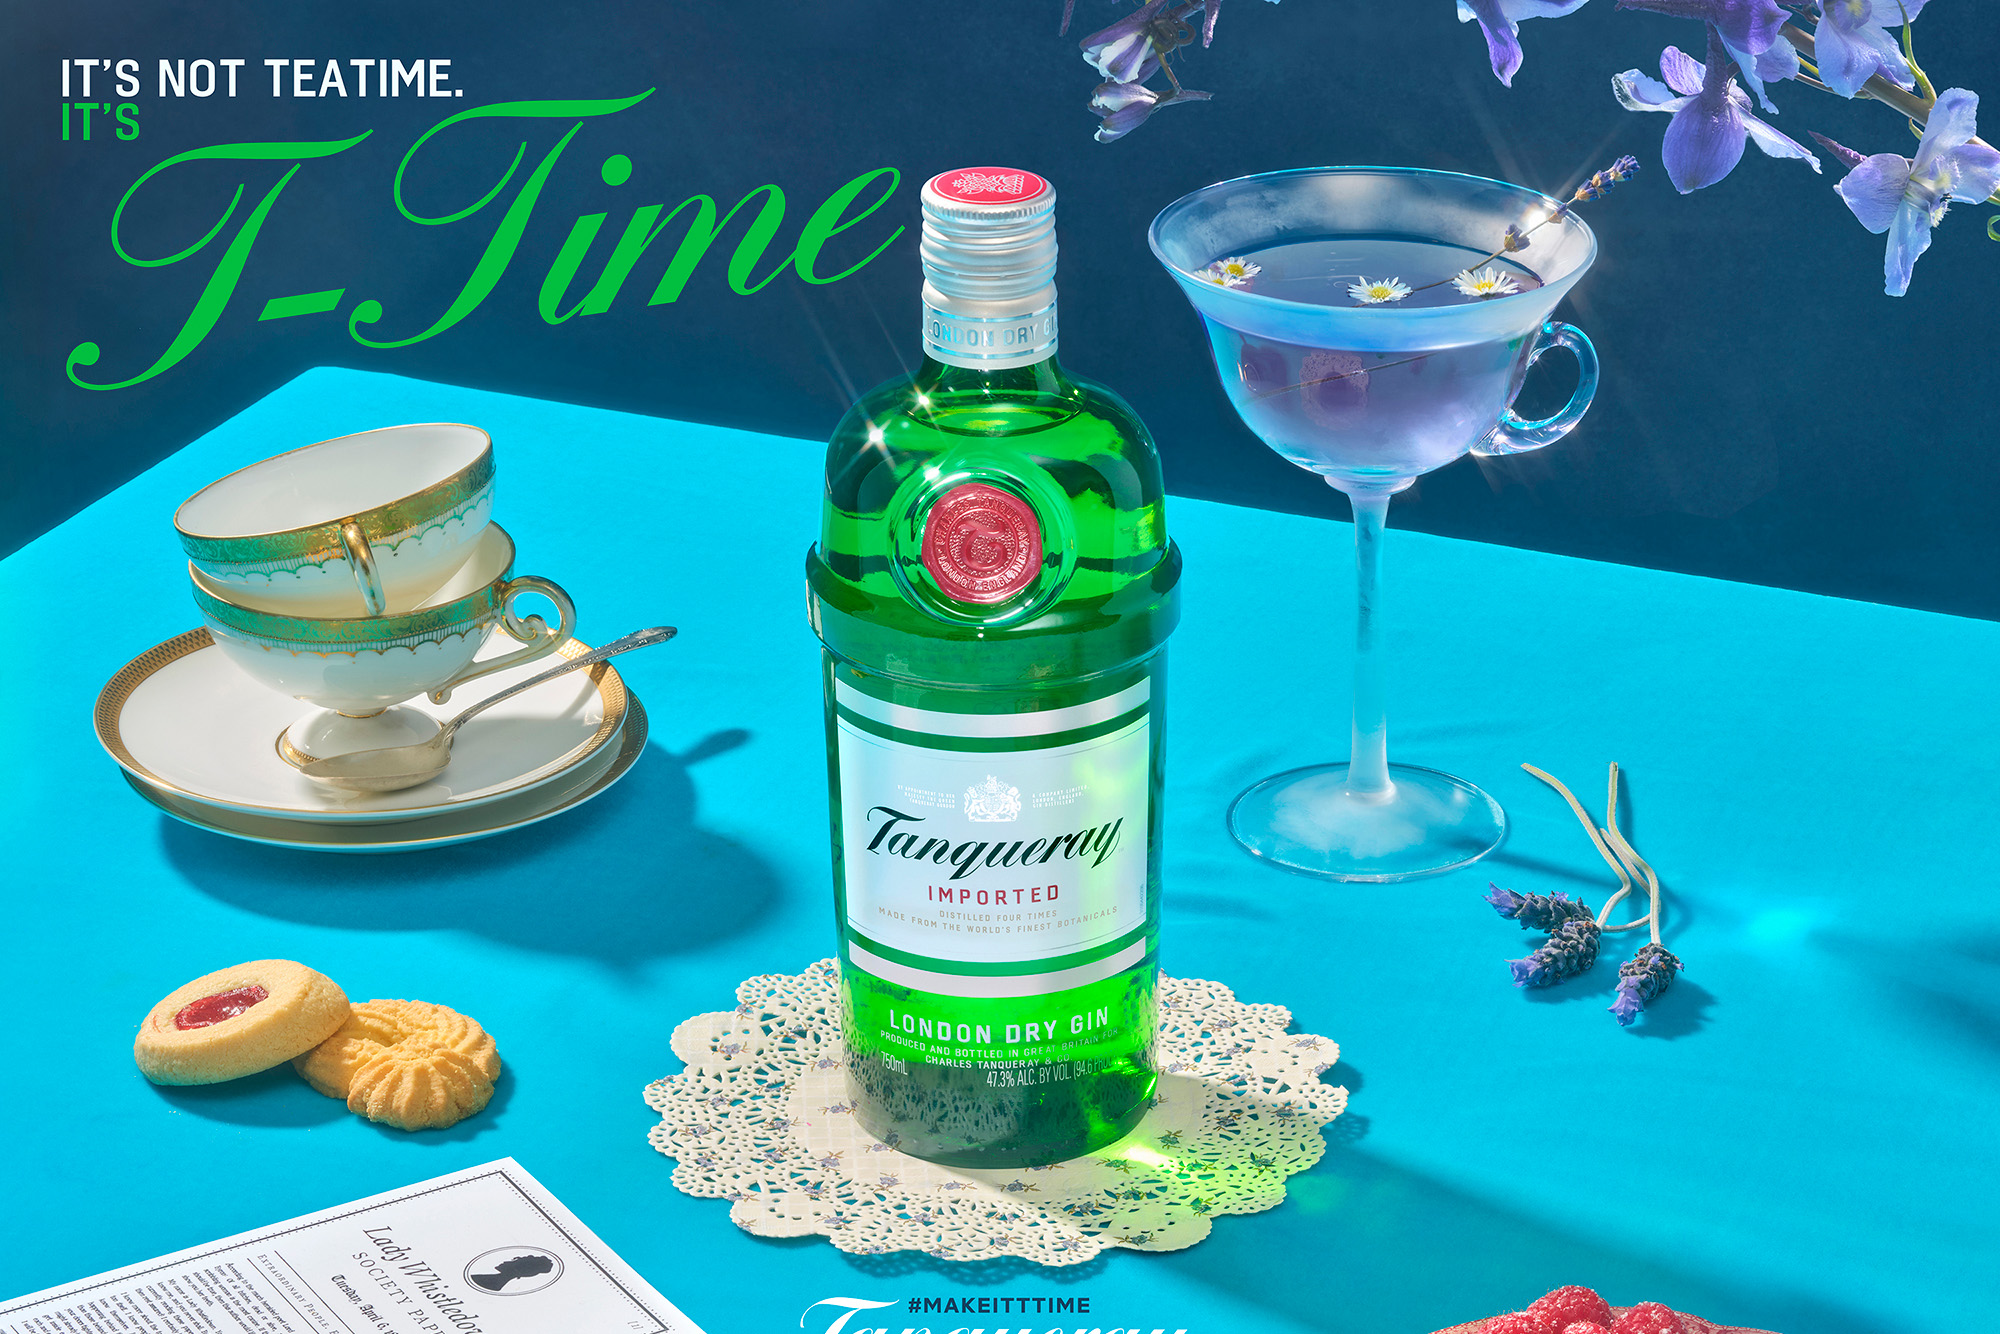 Tanqueray launches new “Make it T-Time” campaign in partnership with the smash Netflix series “Bridgerton.”